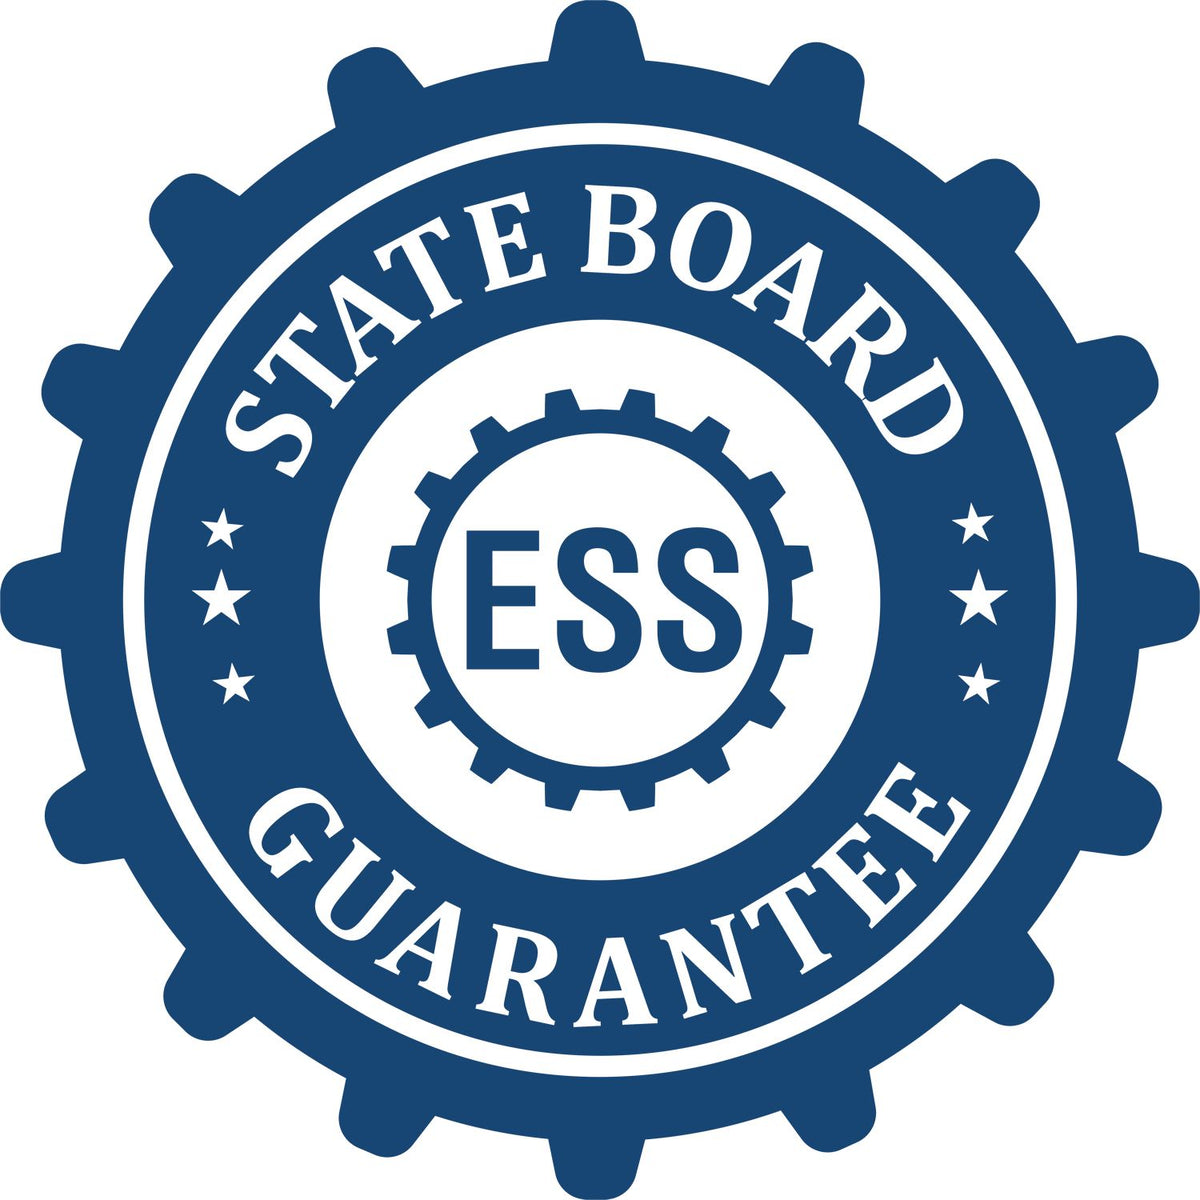 An emblem in a gear shape illustrating a state board guarantee for the Hybrid Oklahoma Geologist Seal